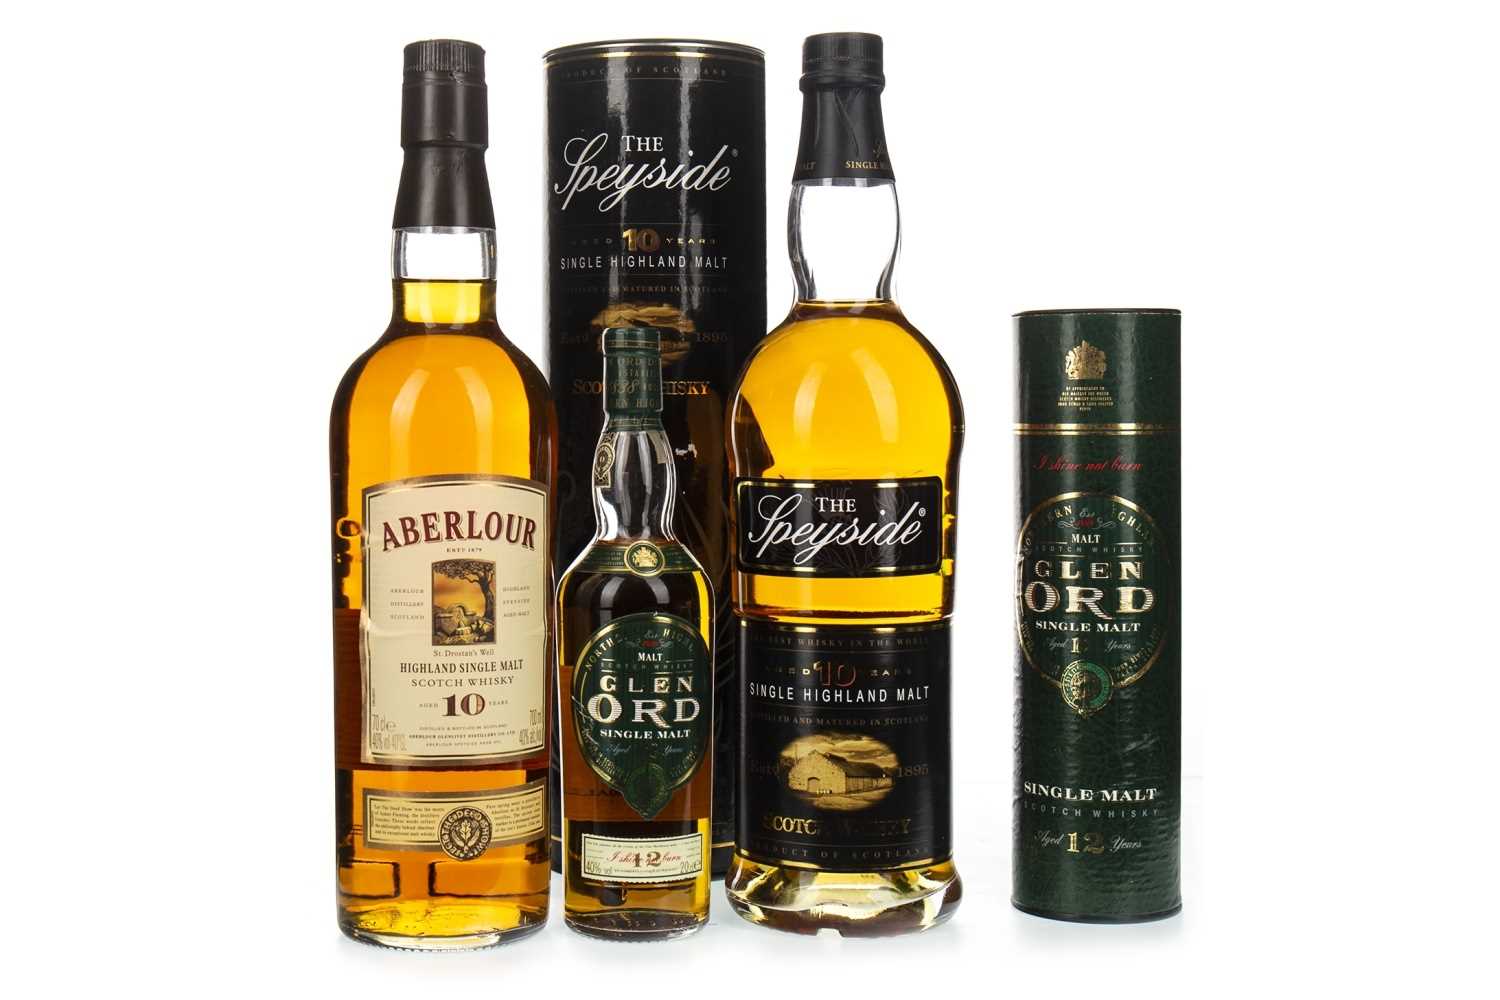 Lot 1305 - ABERLOUR 10 YEARS OLD, THE SPEYSIDE 10 YEARS OLD AND GLEN ORD 12 YEARS OLD